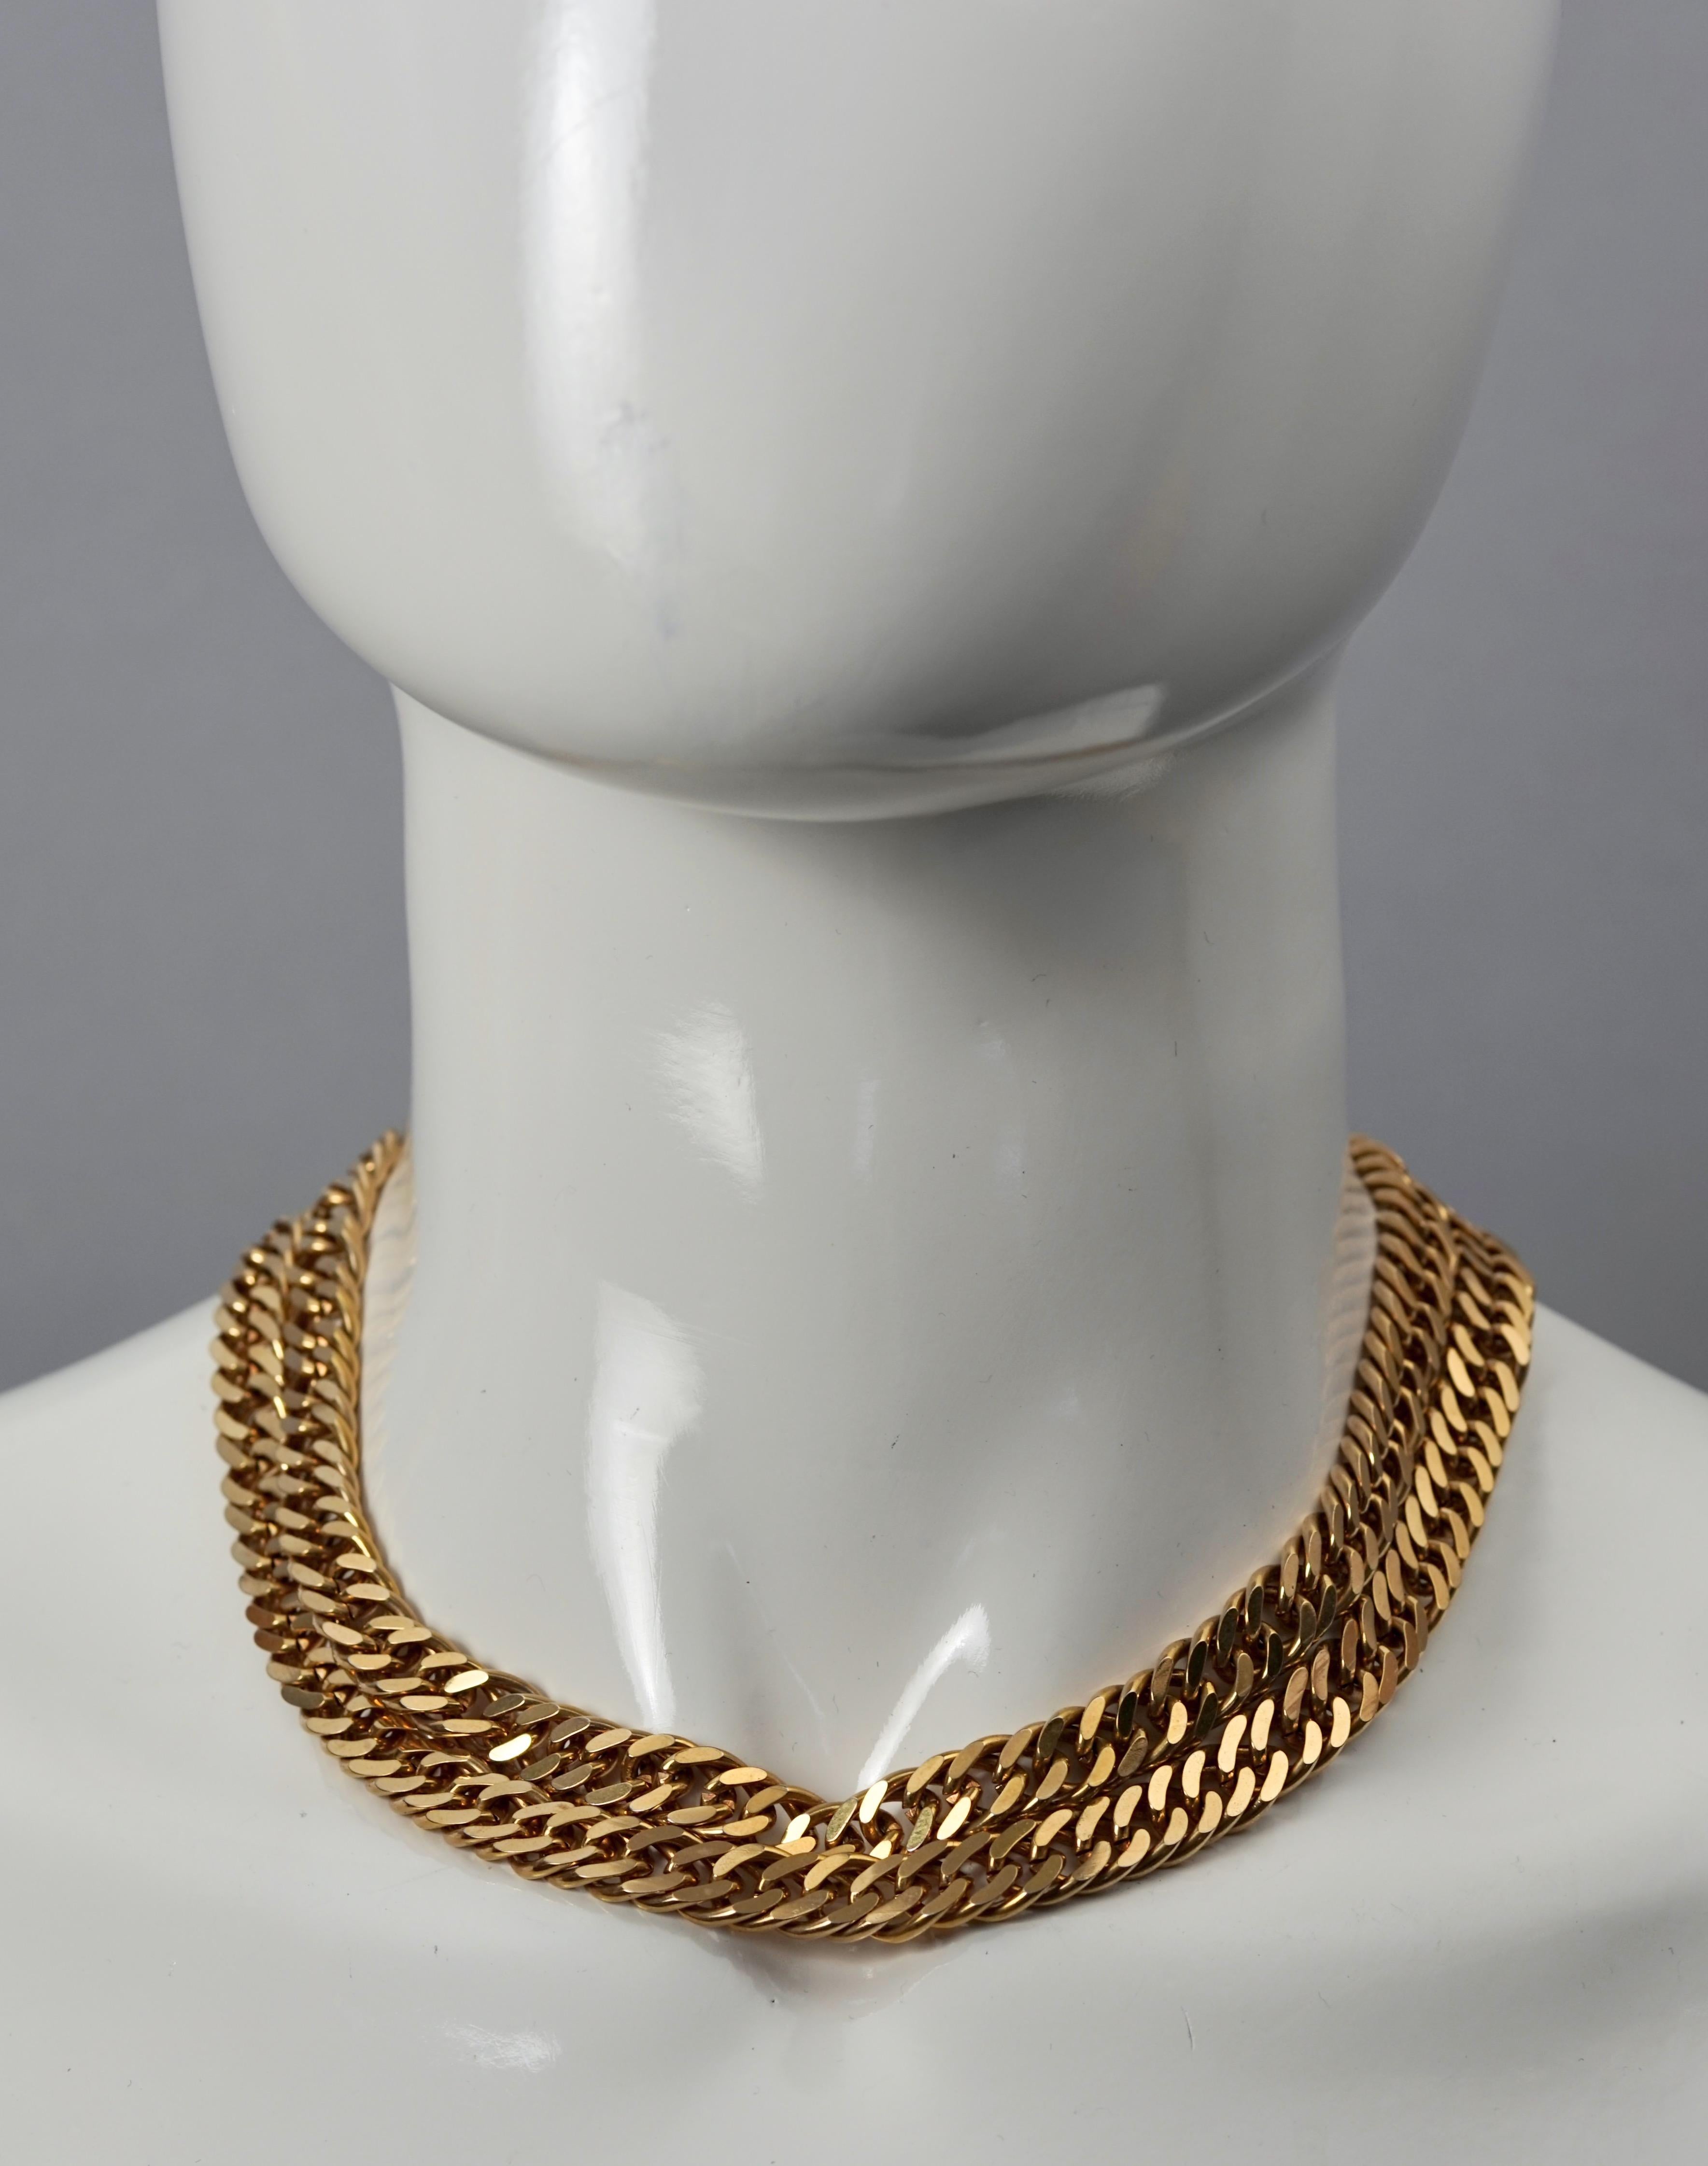 Vintage CHRISTIAN DIOR Chunky Double Chain Choker Necklace

Measurements:
Height: 0.78 inch (2 cm)
Adjustable Length: 15.74 inches to 17.51 inches (40 cm to 44.5 cm)

Features:
- 100% Authentic CHRISTIAN DIOR.
- Double layer of chunky chains